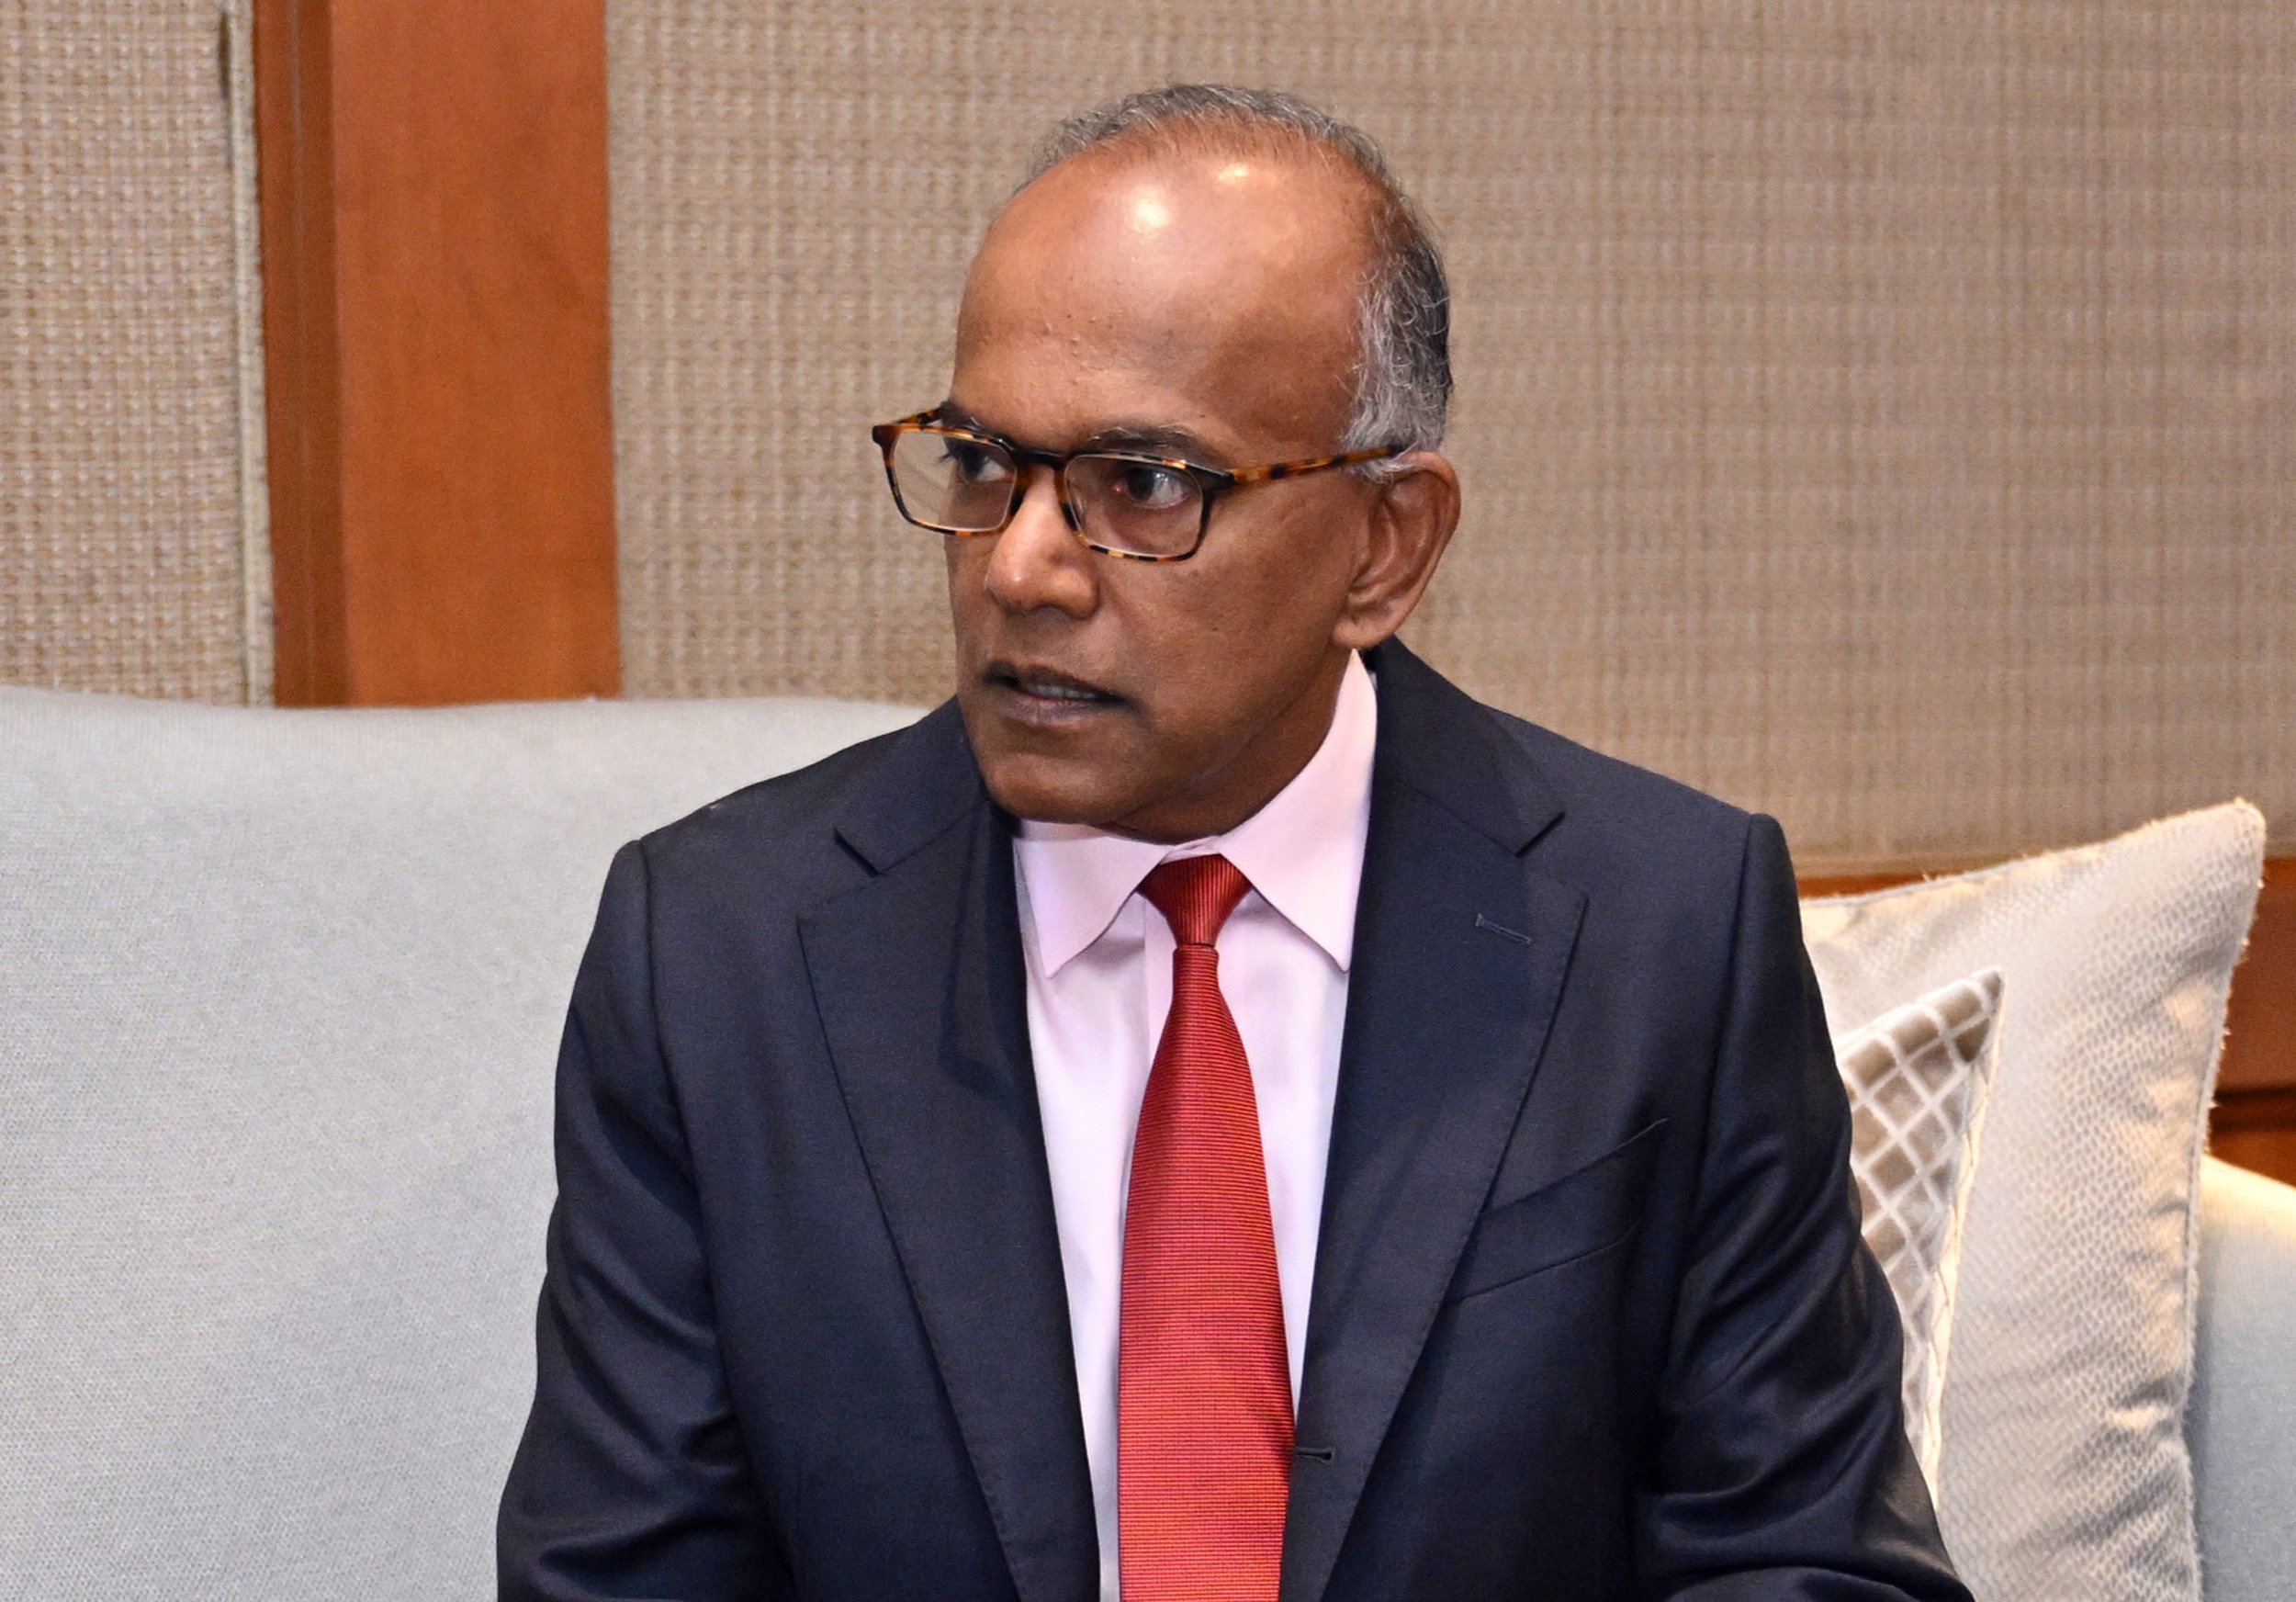 Singapore law minister K Shanmugam has hit back at The Economist for an article they published about the country’s political succession. Photo: SCMPOST